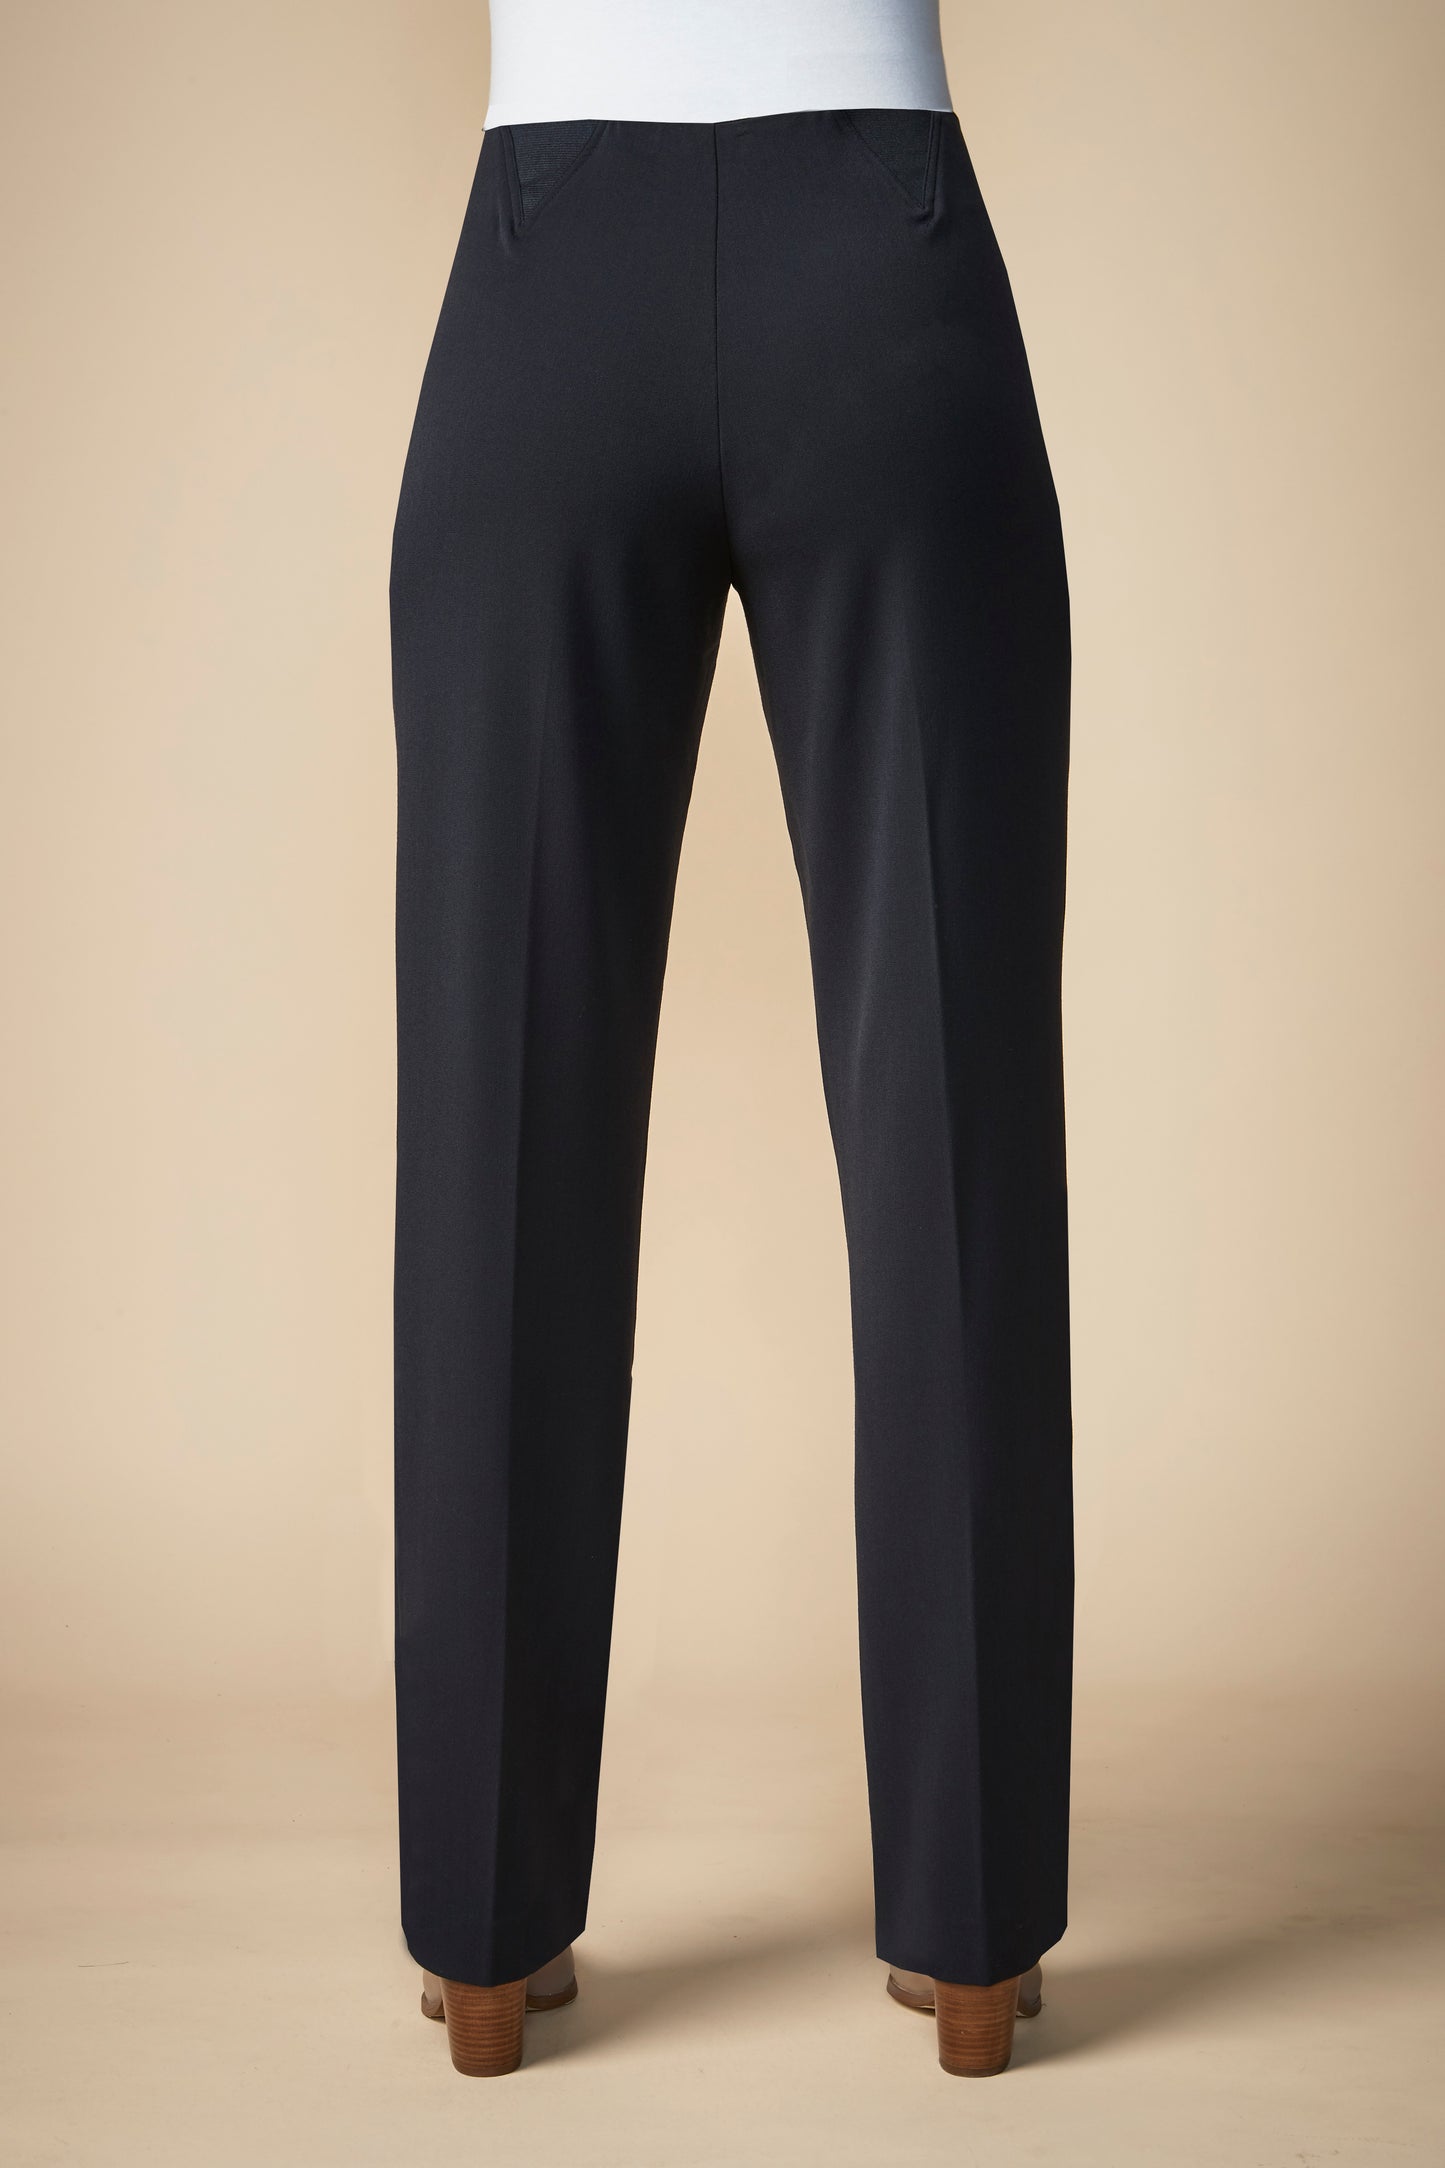 Newport - Pant - Style NP0004-2 - Black Navy Charcoal - Limited Sizes Available